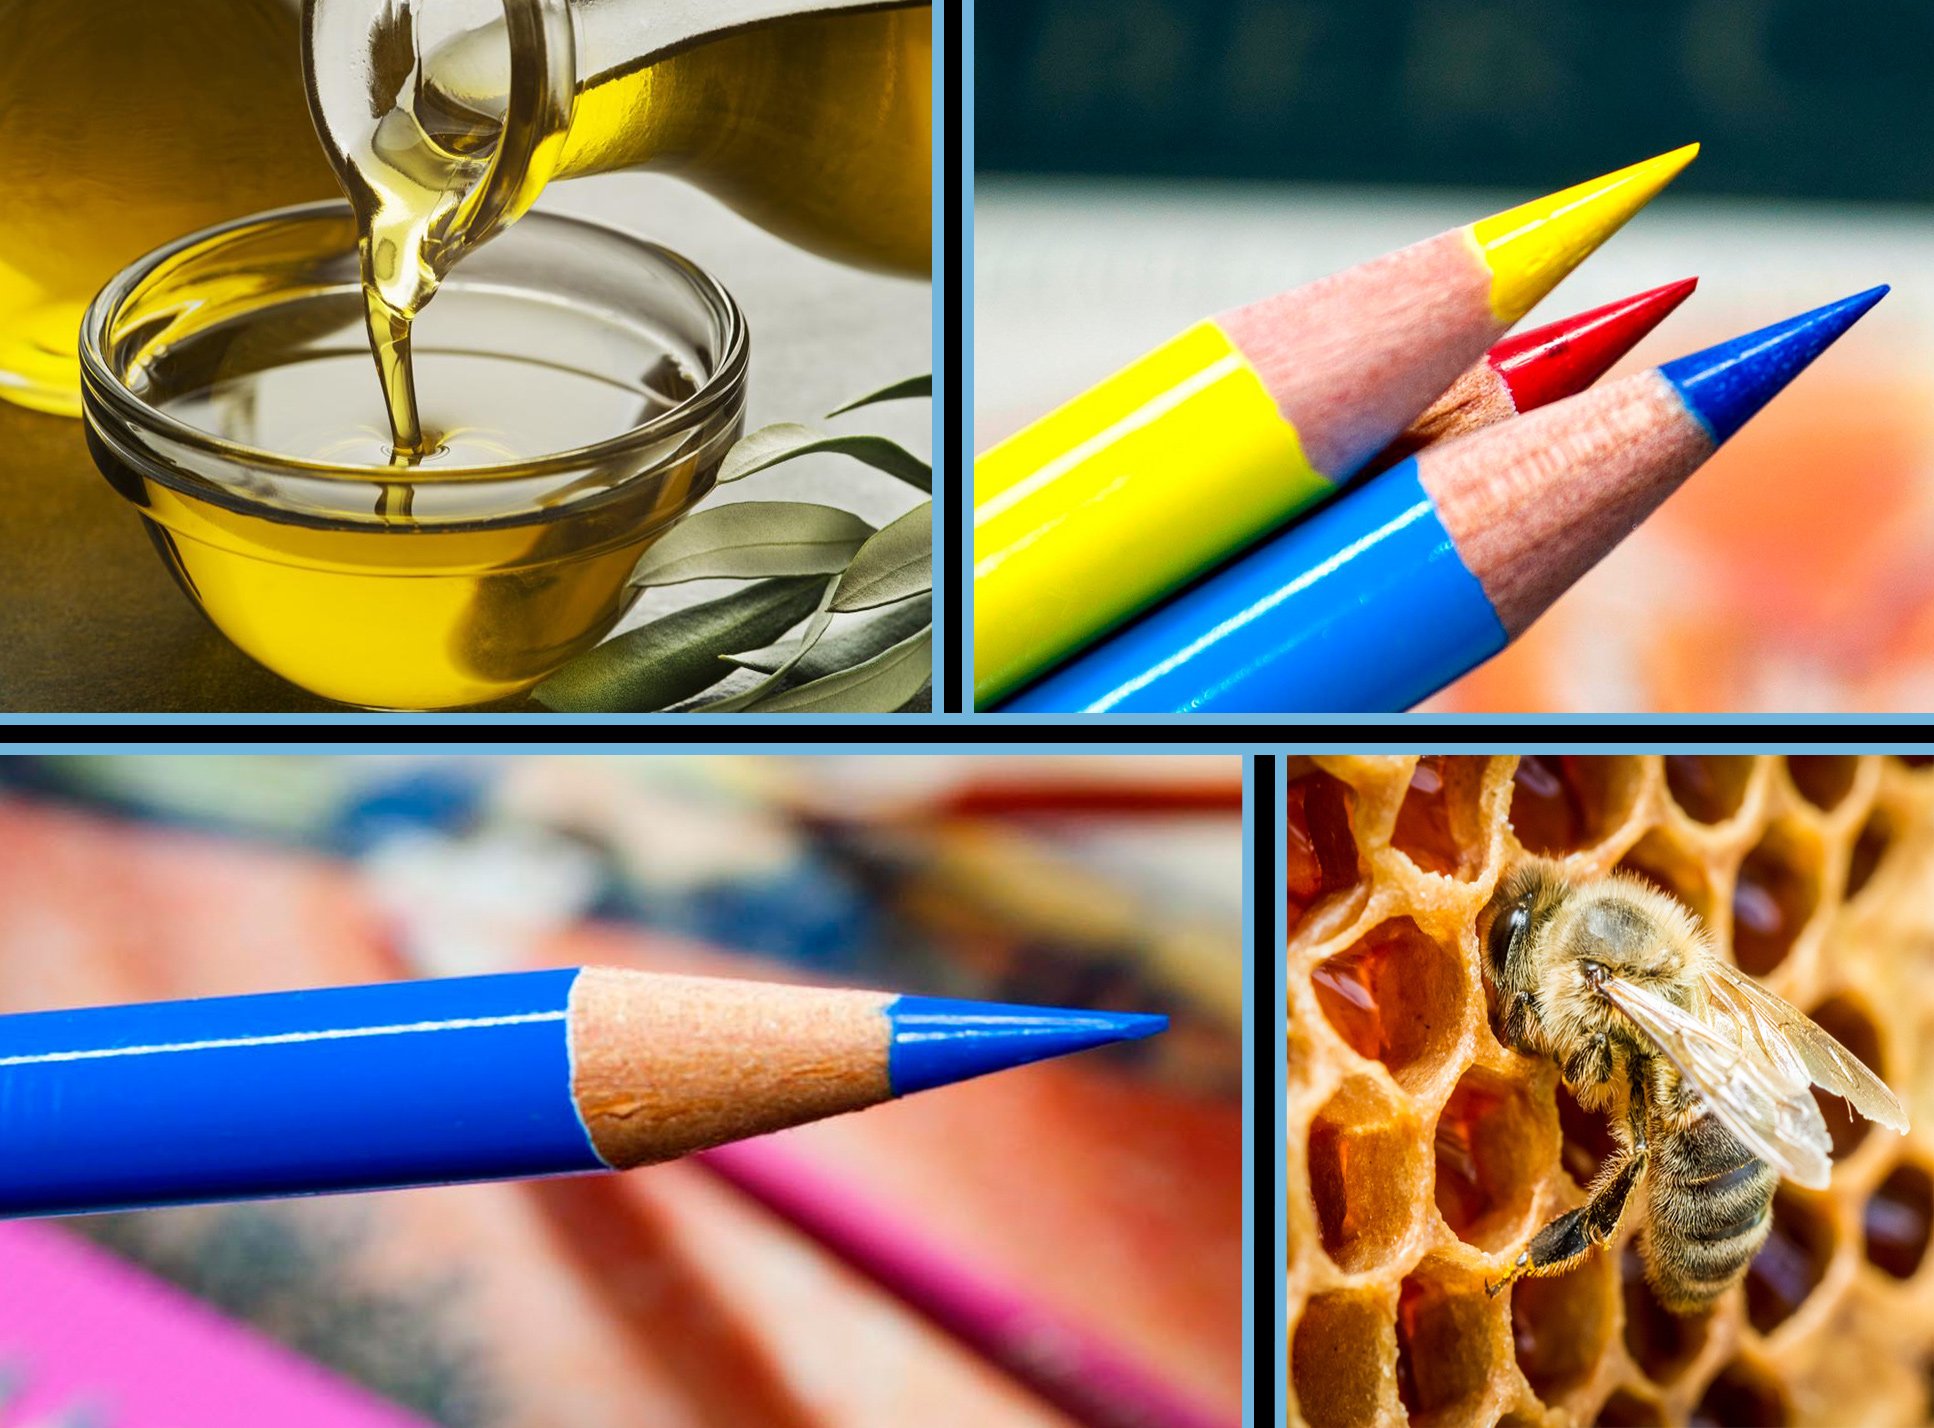 5 Things You Need To Know About Oil And Wax Colored Pencils